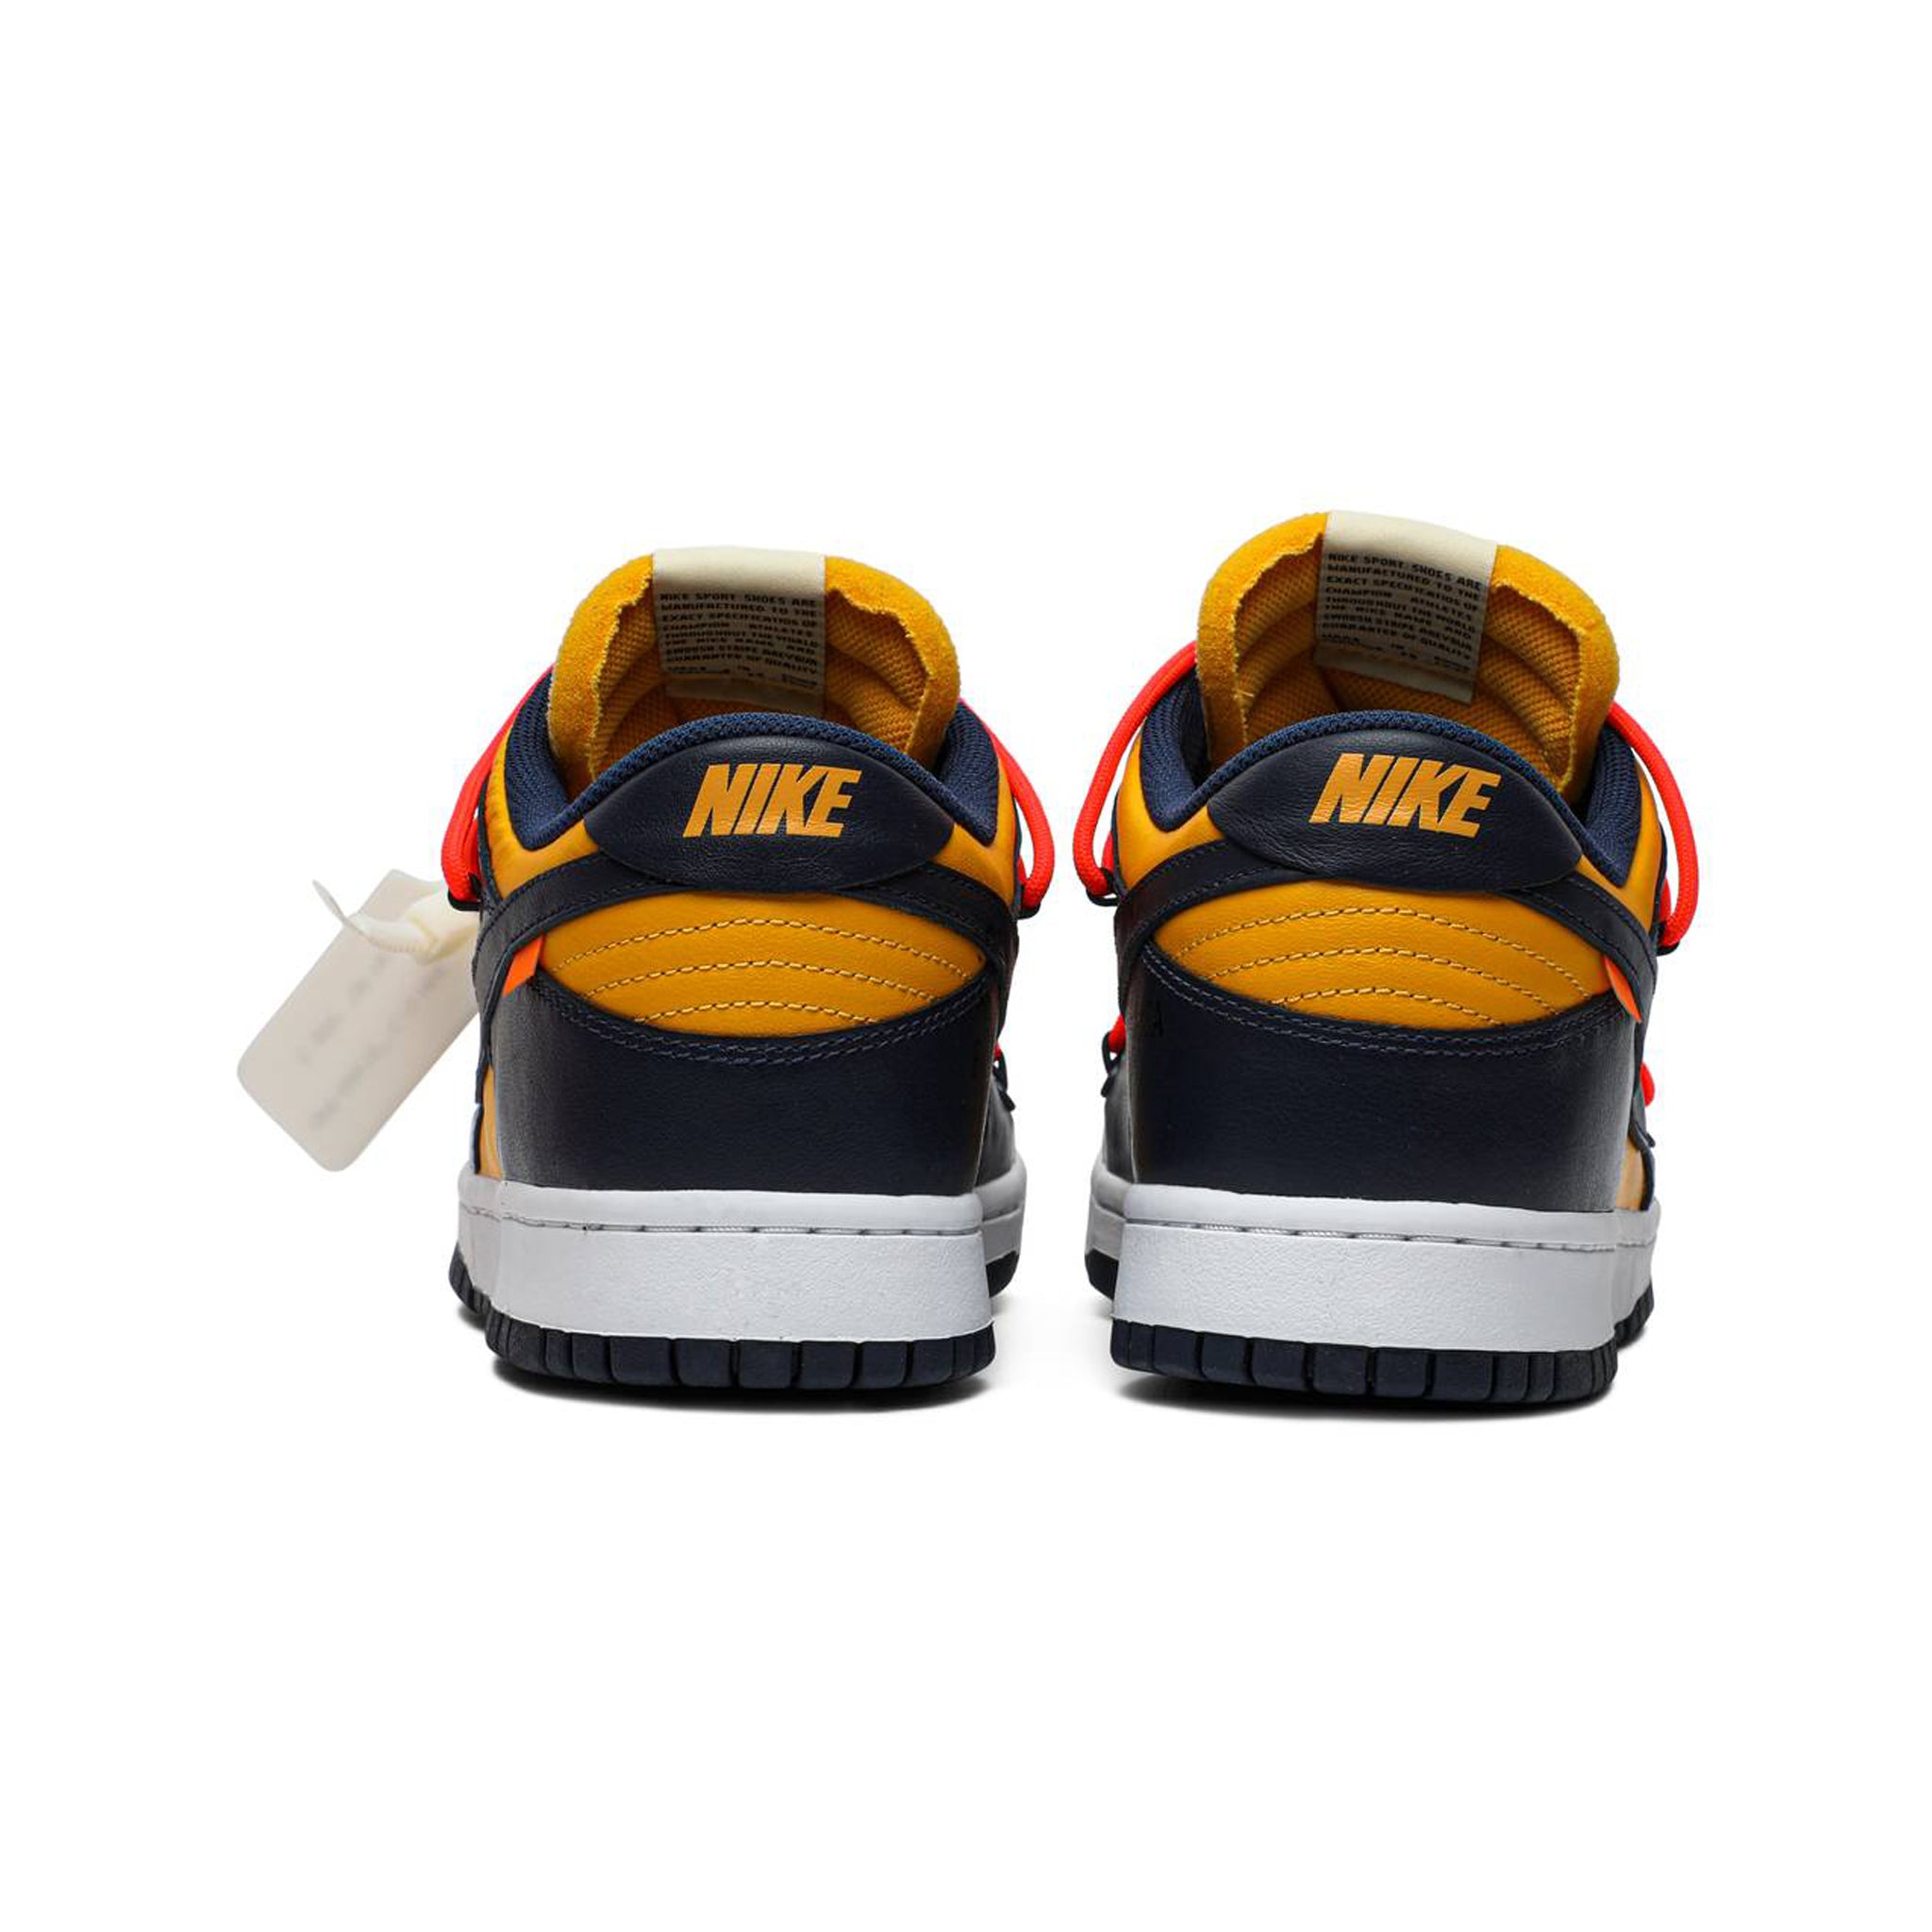 NIKE DUNK LOW OFF-WHITE UNIVERSITY GOLD MIDNIGHT NAVY